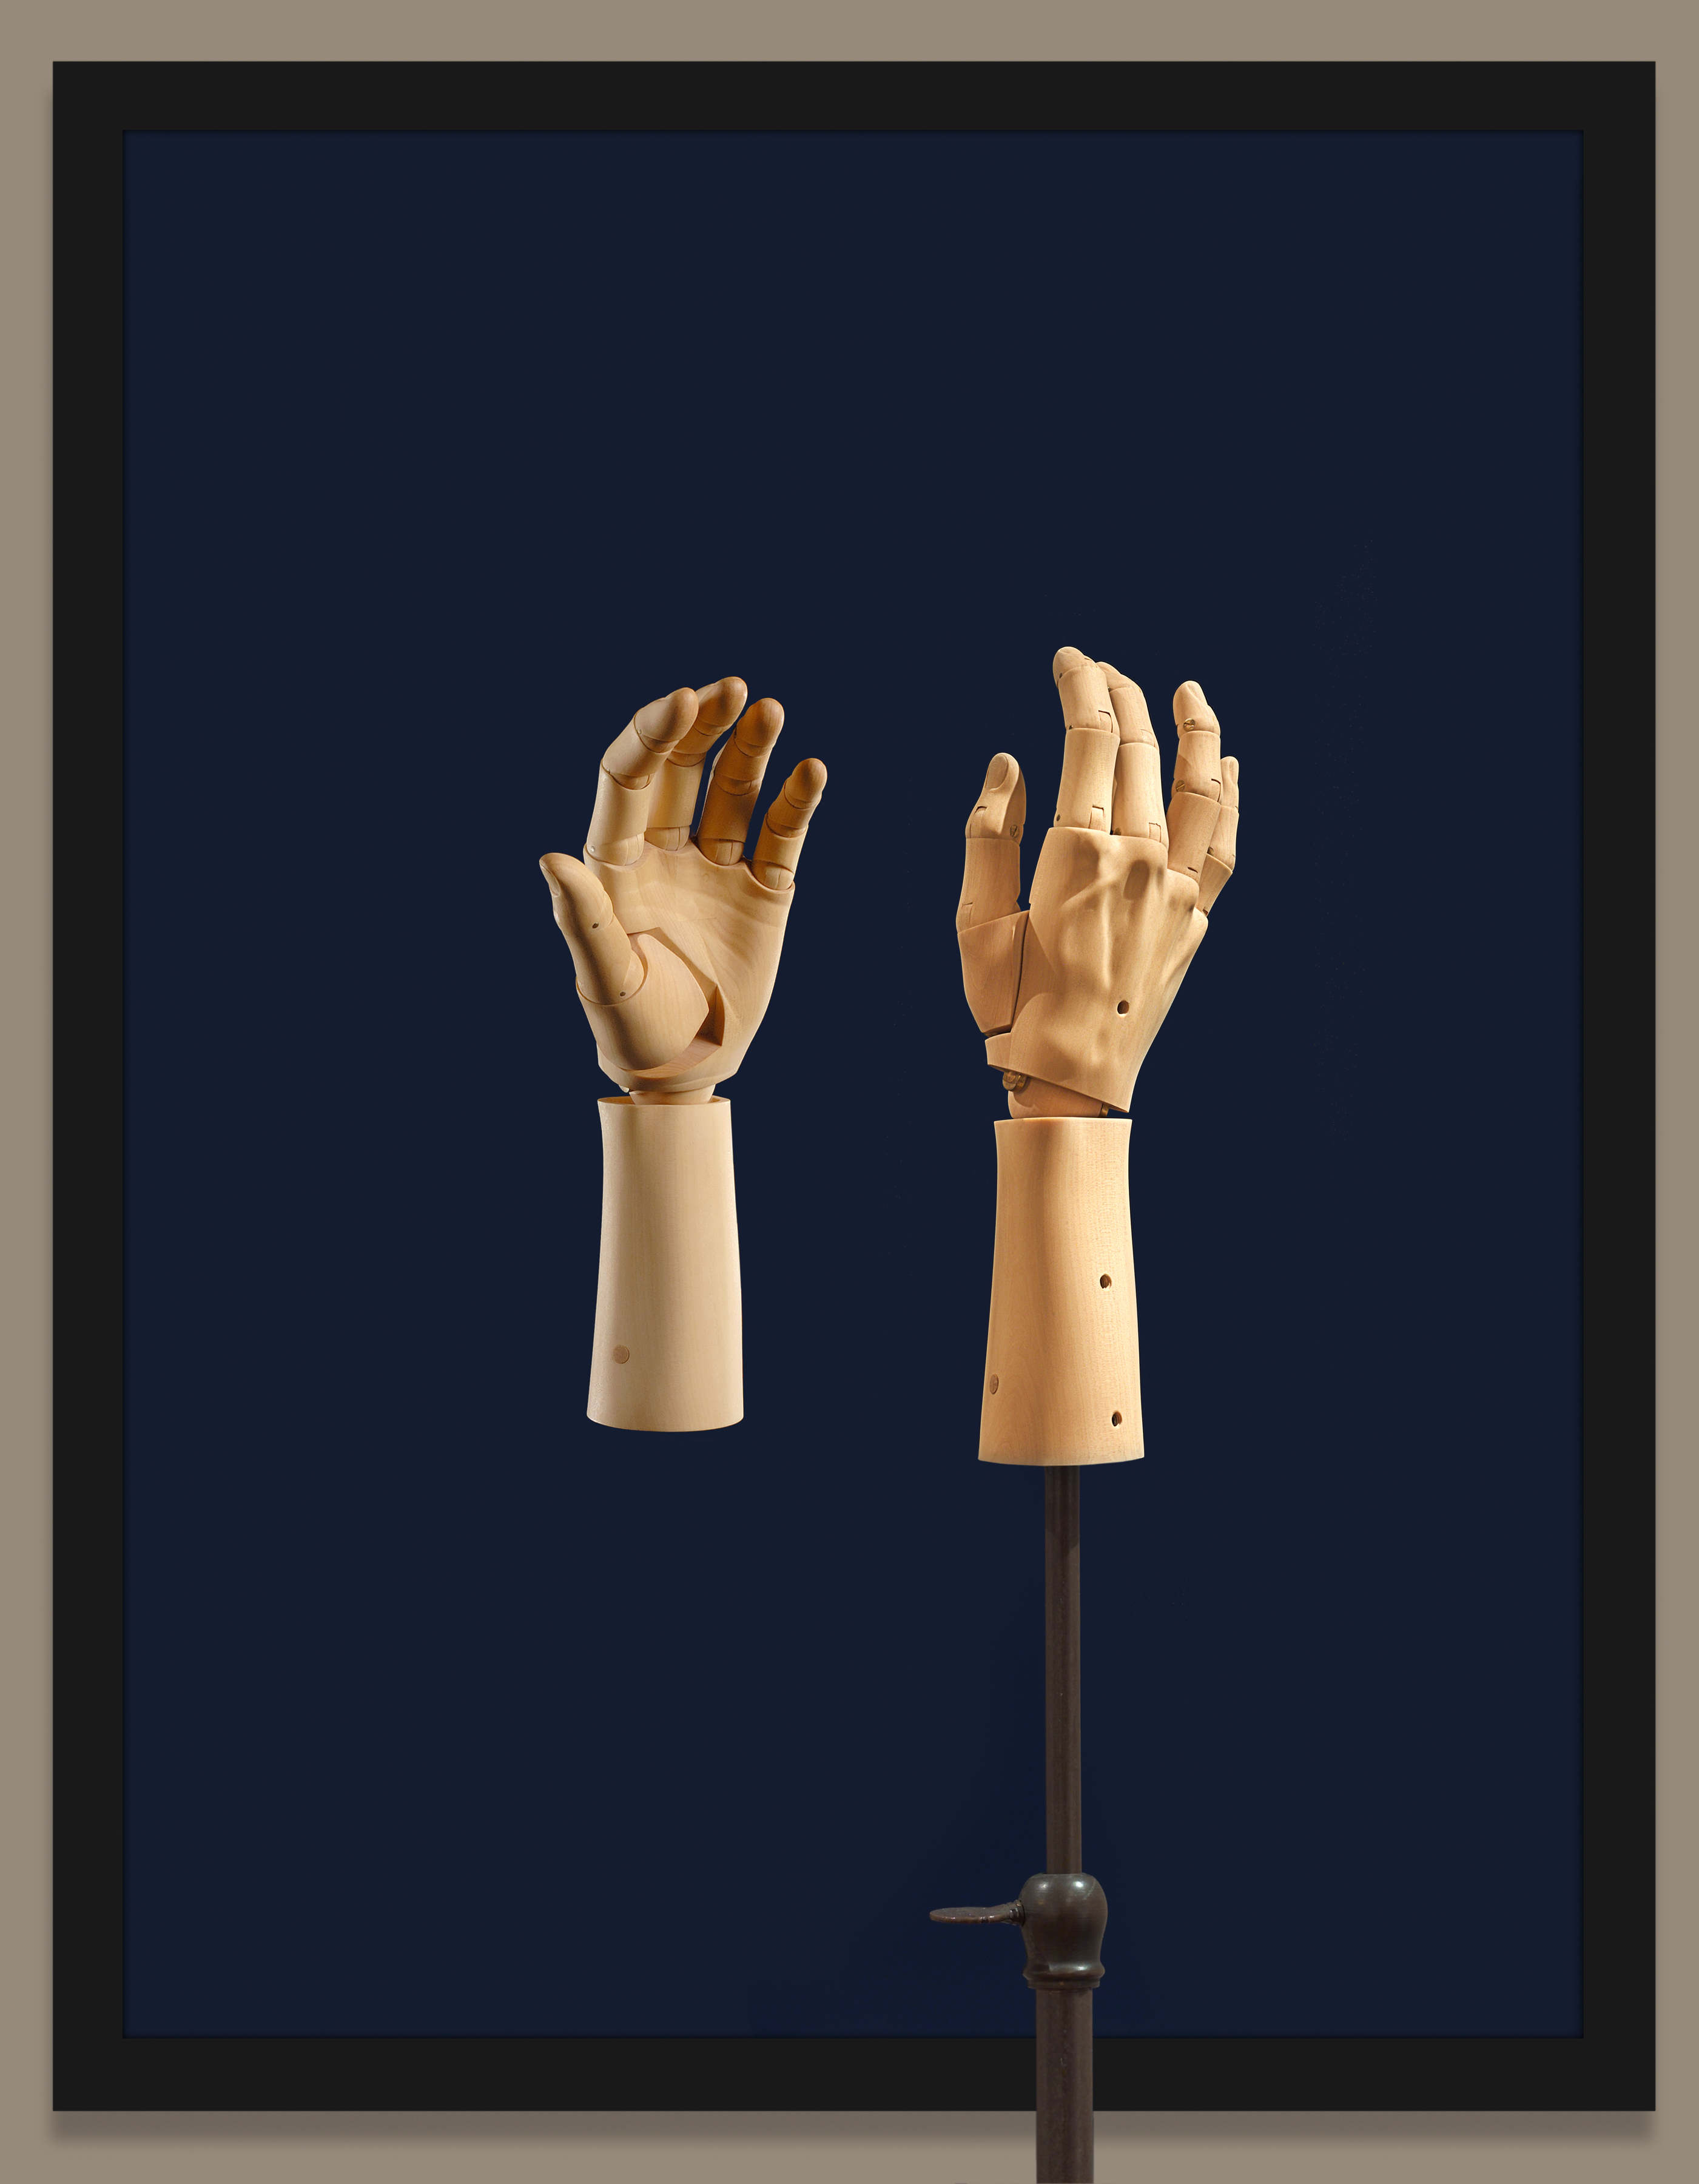 Elizabeth King, Bartlett’s Hand (2005): A carved wooden sculpture has movable joints that hypnotically come to life in an accompanying animated film. From the collection of Robert and Karen Duncan, Lincoln, Nebraska